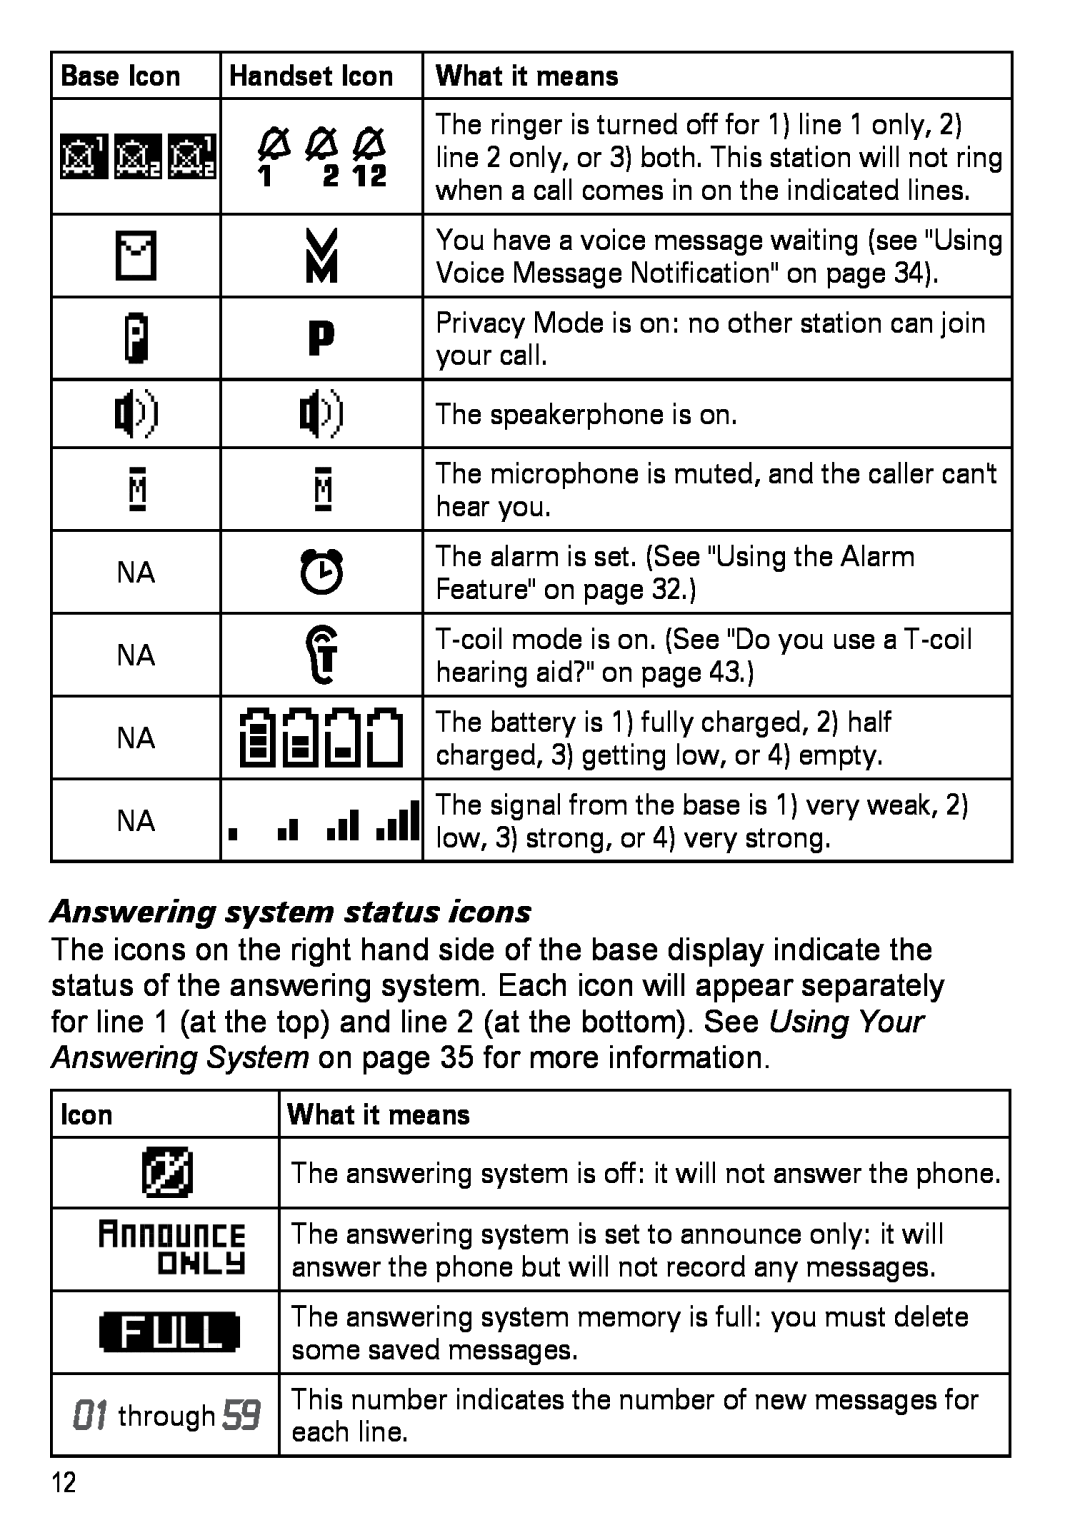 Uniden DECT4086-3, DECT4086-2, DECT4086-4, DECT4086-5 Answering system status icons, Base Icon, Handset Icon, What it means 